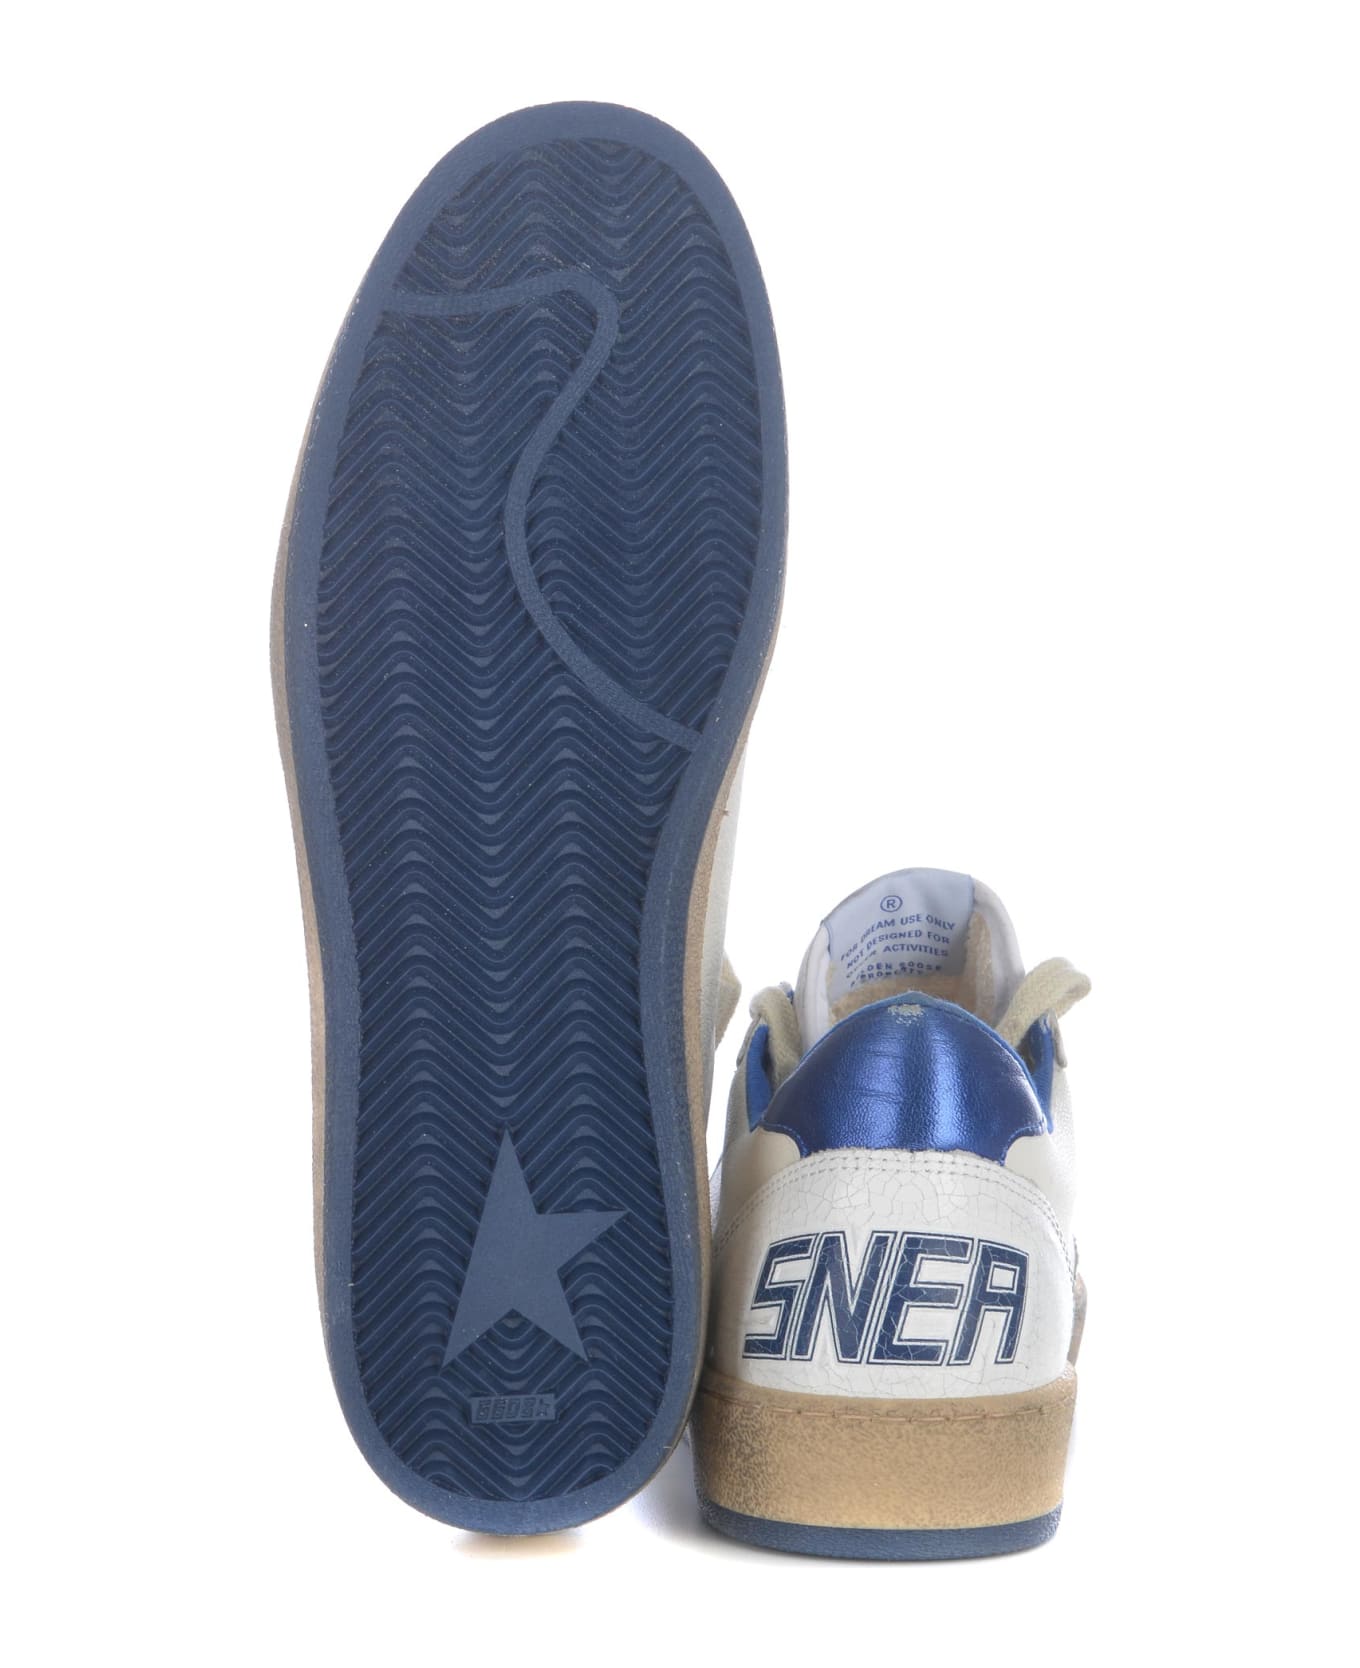 Golden Goose Sneakers Golden Goose "ball Star" Made Of Leather - Bianco/azzurro